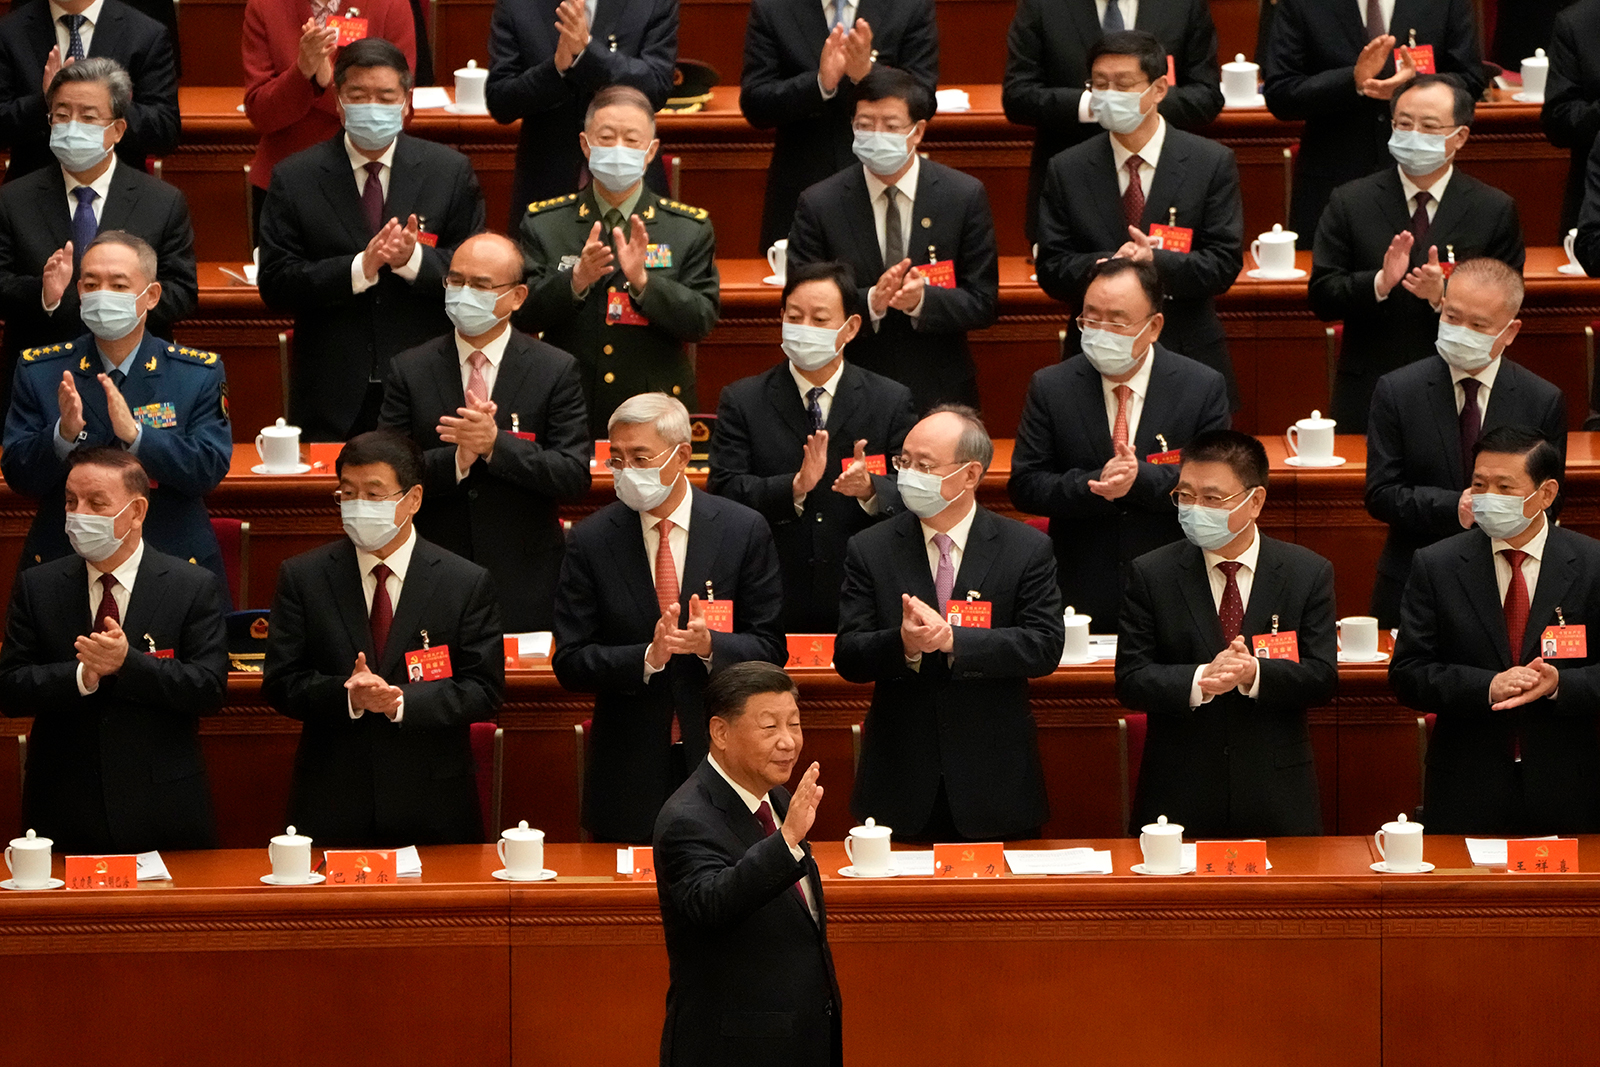 Chinese leader Xi Jinping during the opening ceremony of the 20th National Congress of China's ruling Communist Party in Beijing on October 16.